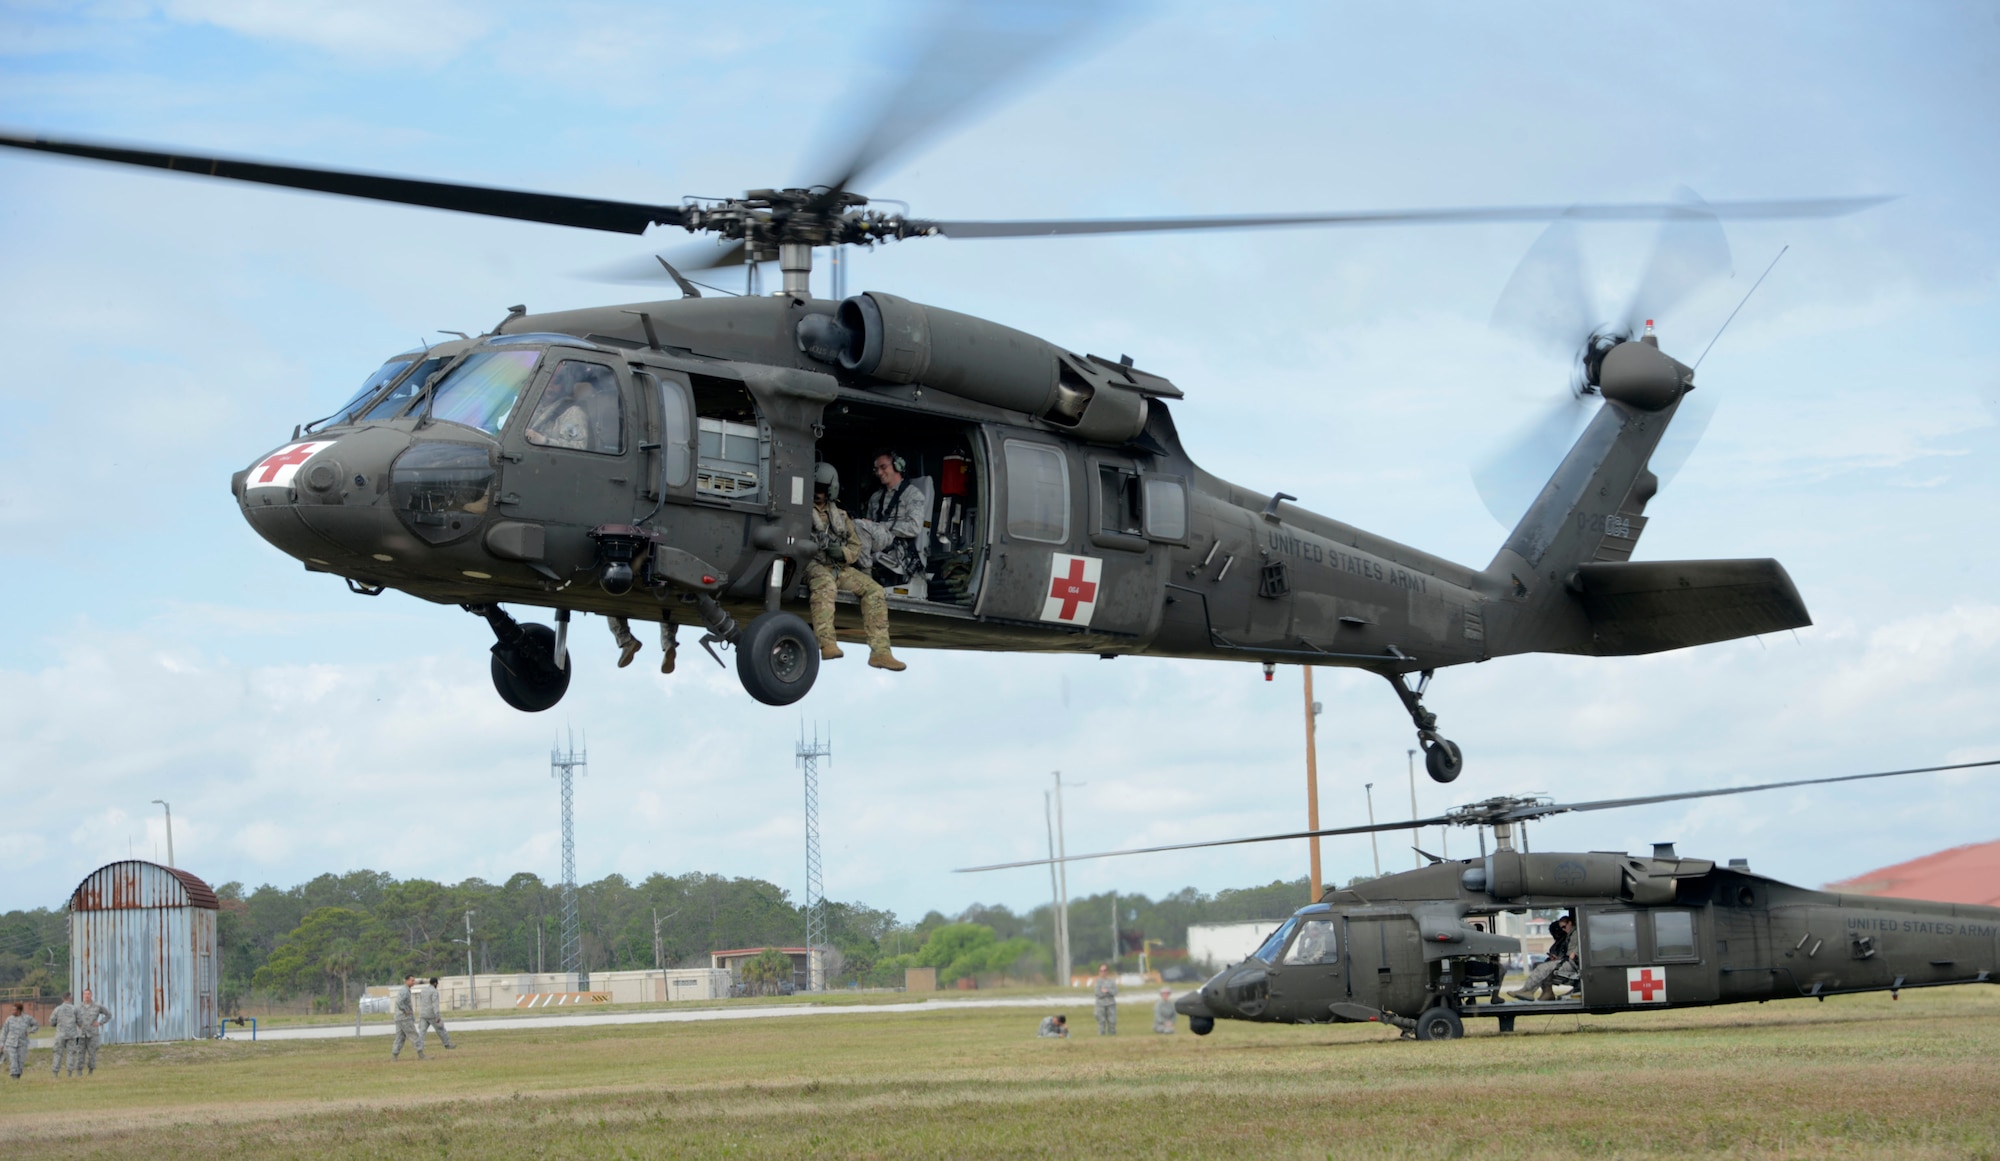 A UH-60 Pave Hawk helicopter begins to take off during an aeromedical evacuation exercise at MacDill Air Force Base, Fla., March 12, 2017. Airmen from the 6th Medical Group had the opportunity to fly in the HH-60 Black Hawk to experience the space and requirements needed for a safe and effective aeromedical evacuation. (U.S. Air Force photo by Senior Airman Tori Schultz)